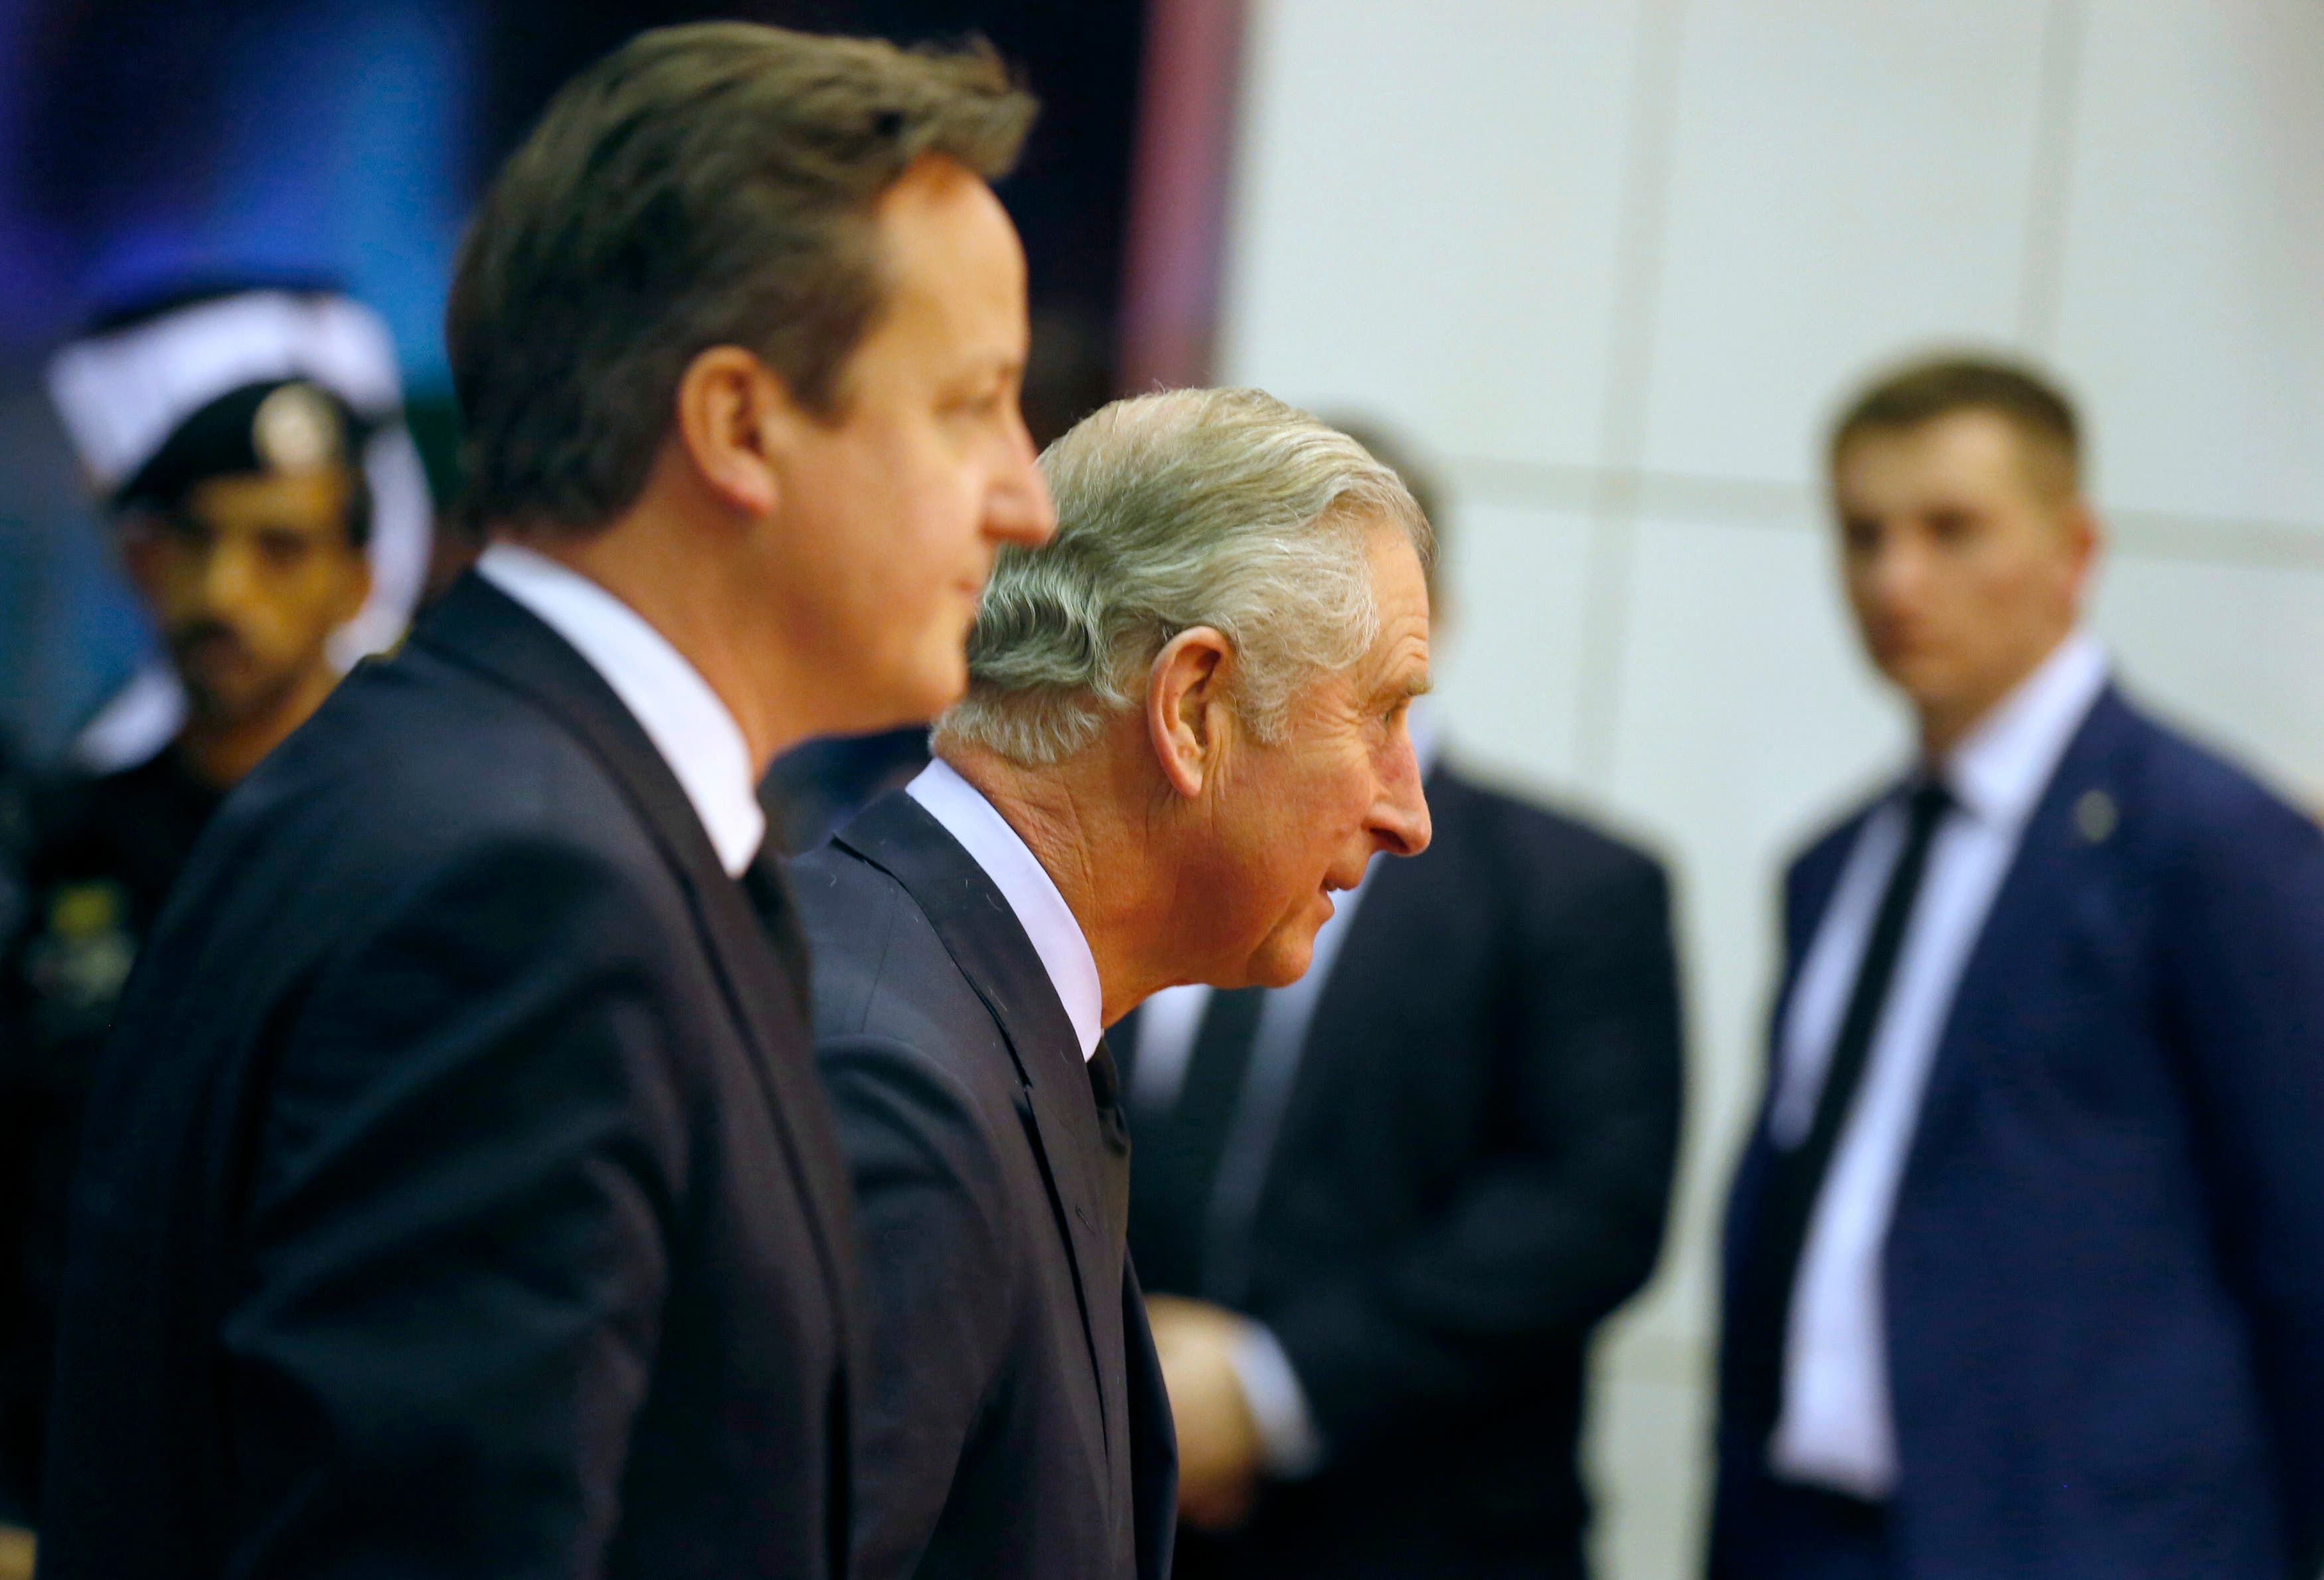 Britain's Prince Charles and PM Cameron arrive to offer condolences following the death of Saudi King Abdullah in Riyadh